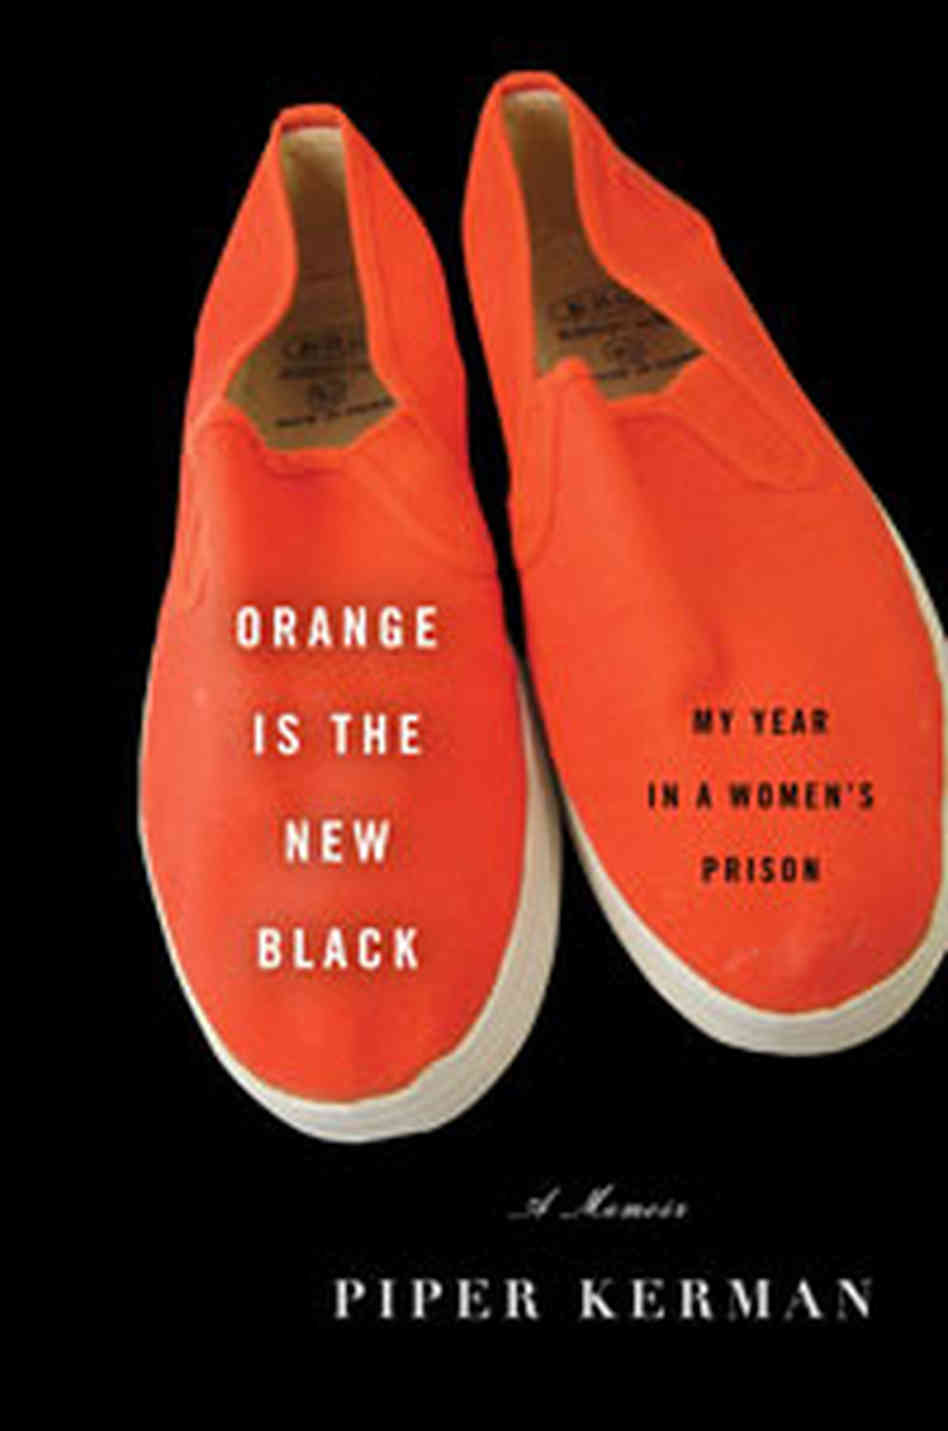 Orange is the New Black Book Review